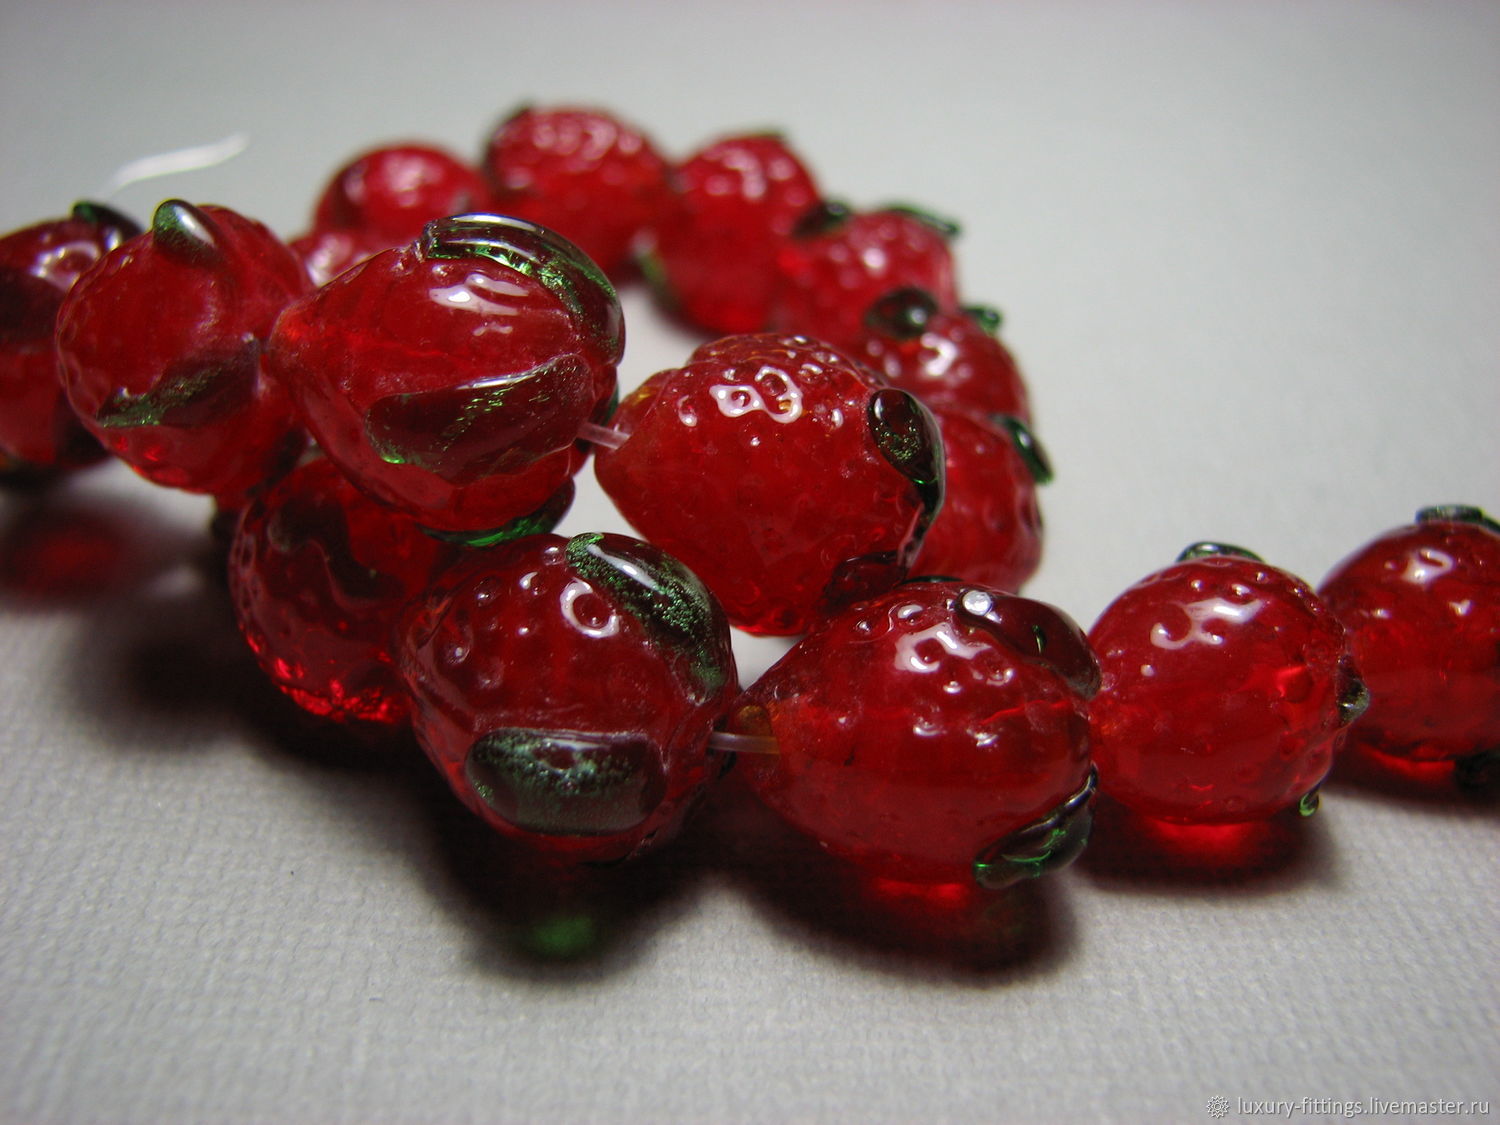 Strawberry glass, Glass bead, Beads1, Moscow,  Фото №1